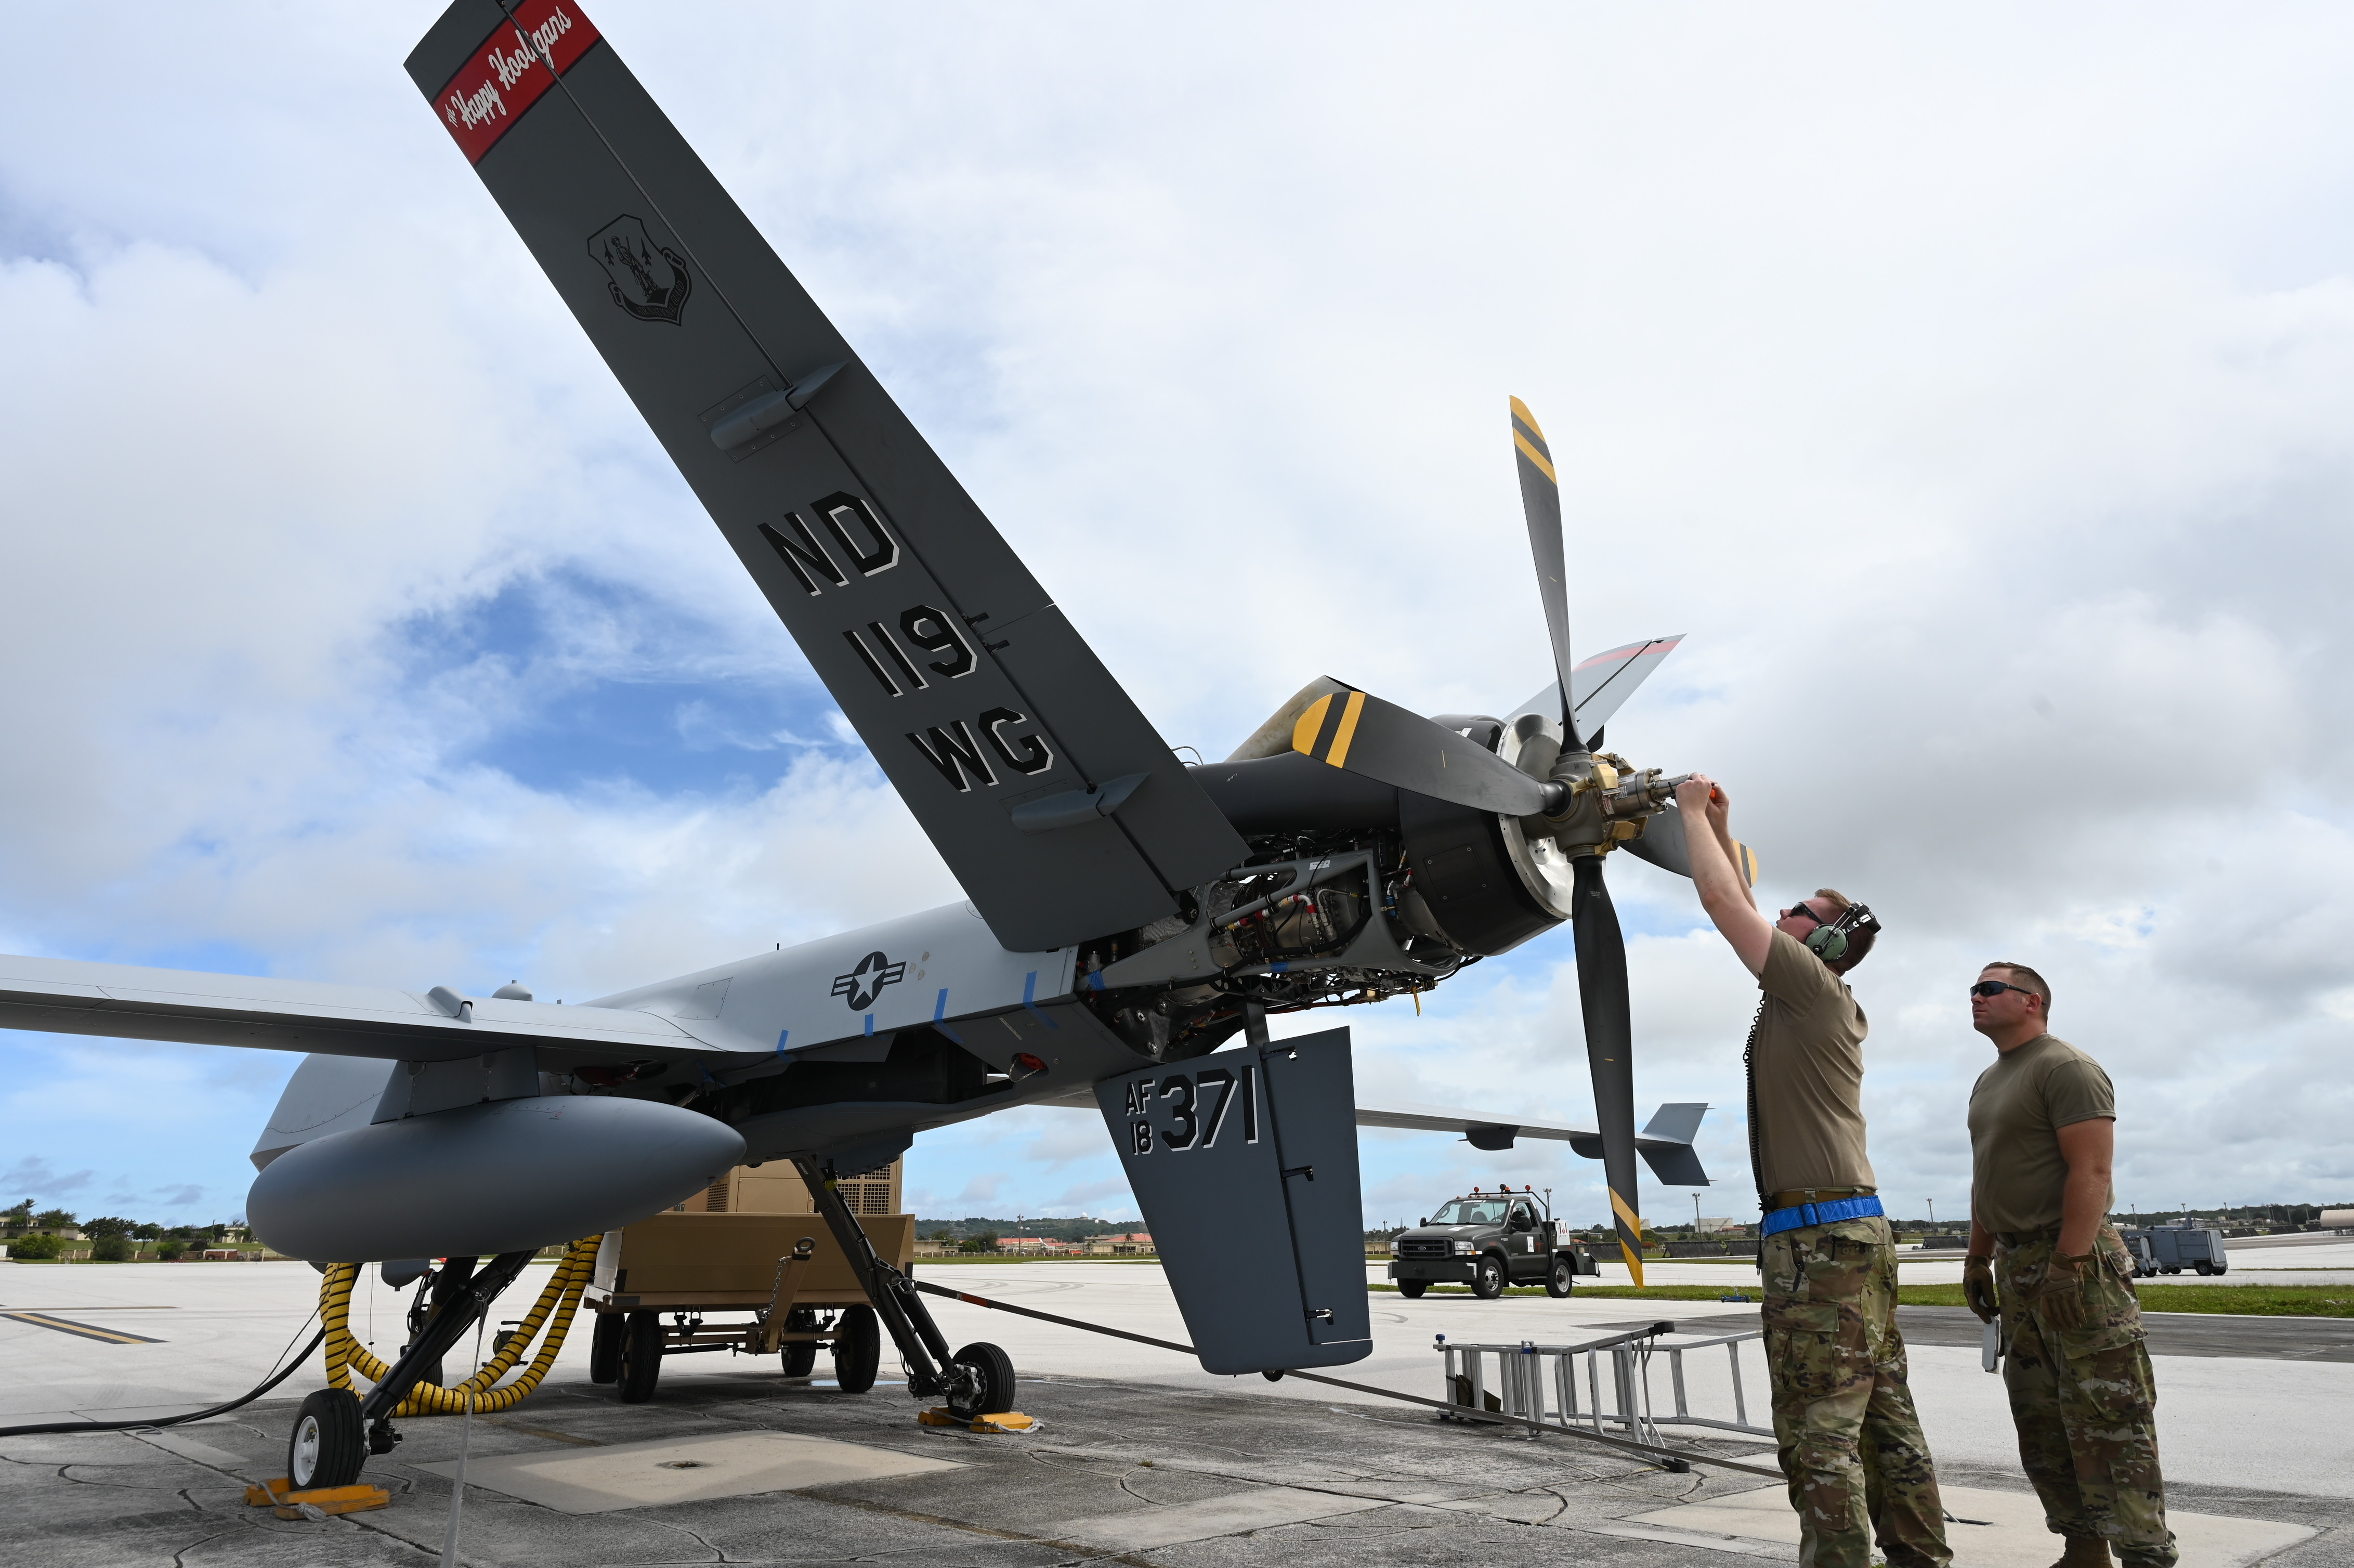 MQ-9 squadron 'to ensure a free and open Indo-Pacific,' Air Force says